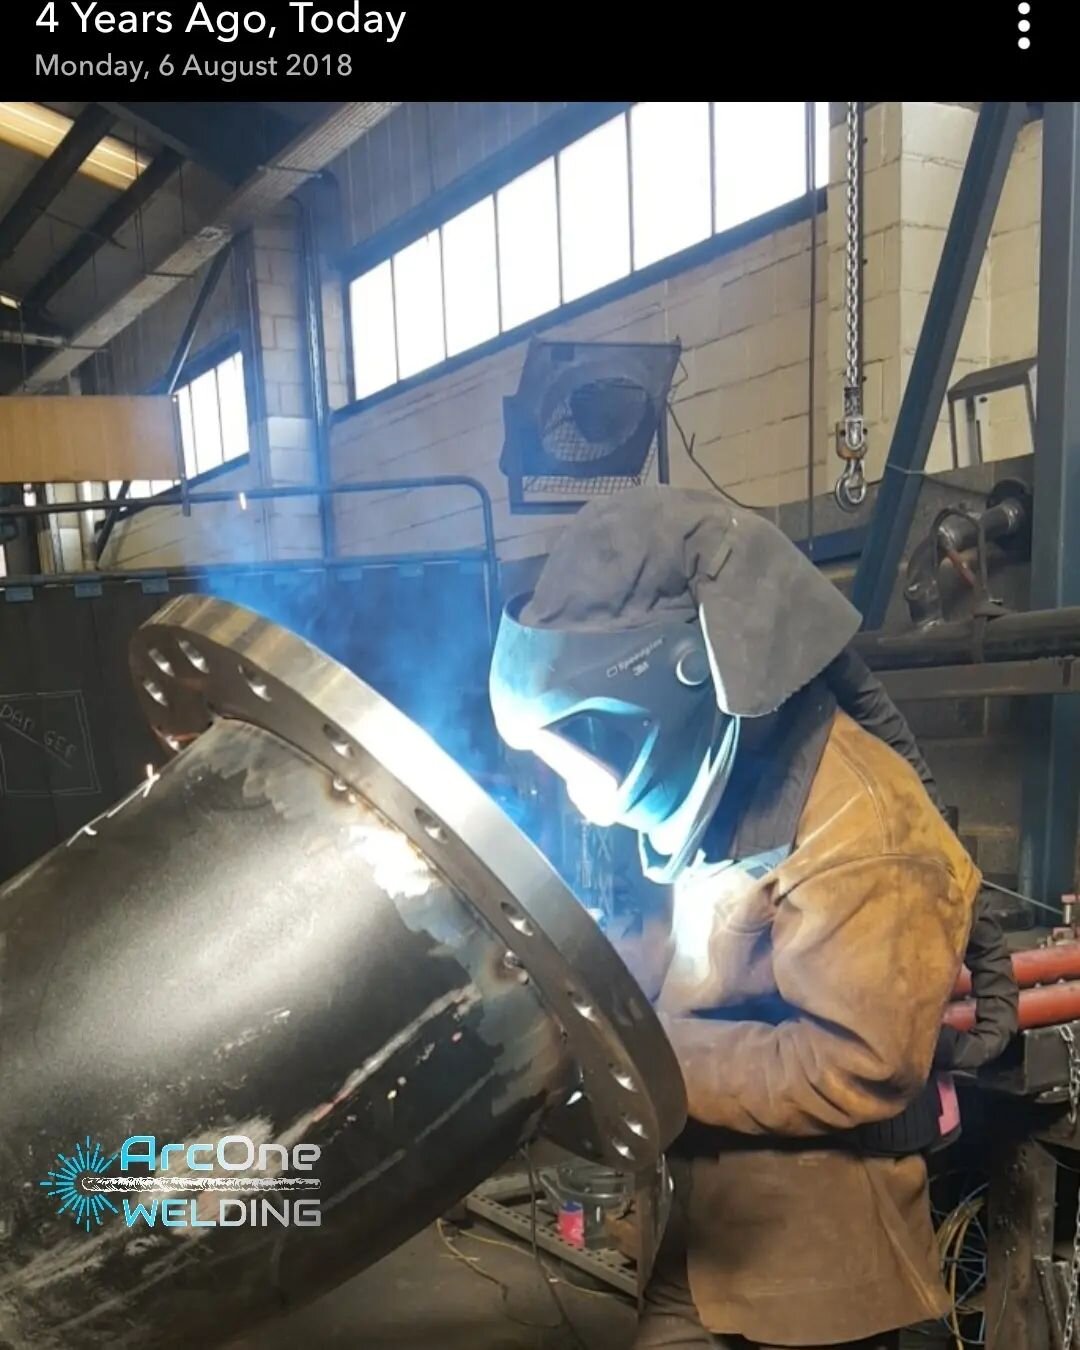 You may not know this but ive got a pipe welding little brother, we used to work together but hes back on structural welding
 ■
□
■
□
■
□
#welding #welder #fabrication #weld #weldporn #weldernation #tigwelding #tig #weldlife #metalwork #weldinglife #